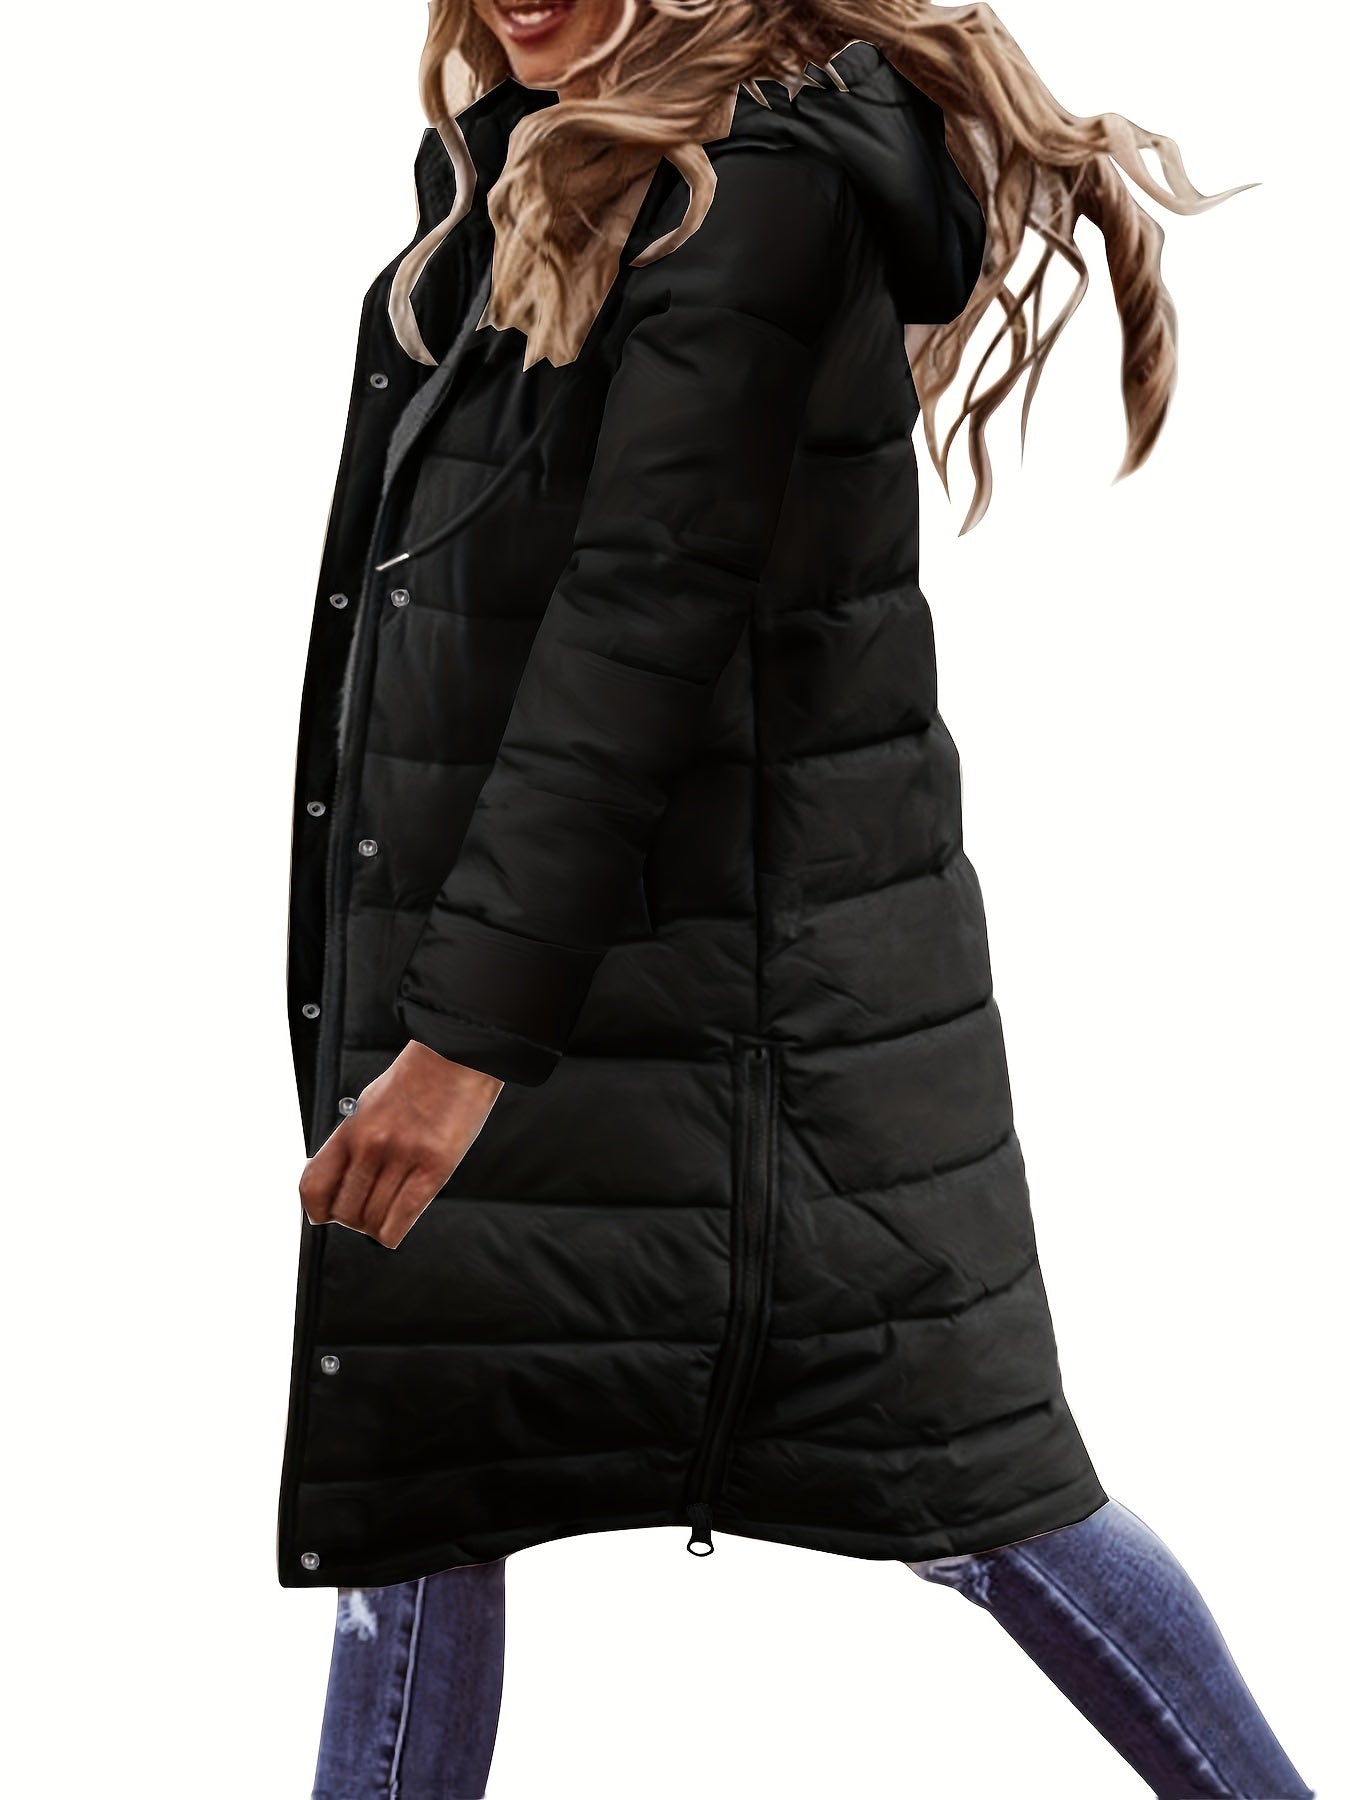 Button Hoodies & Puffy Coat Collection - Stay Cozy in Style! - Women's Jacket & Coat-CasualFlowshop 